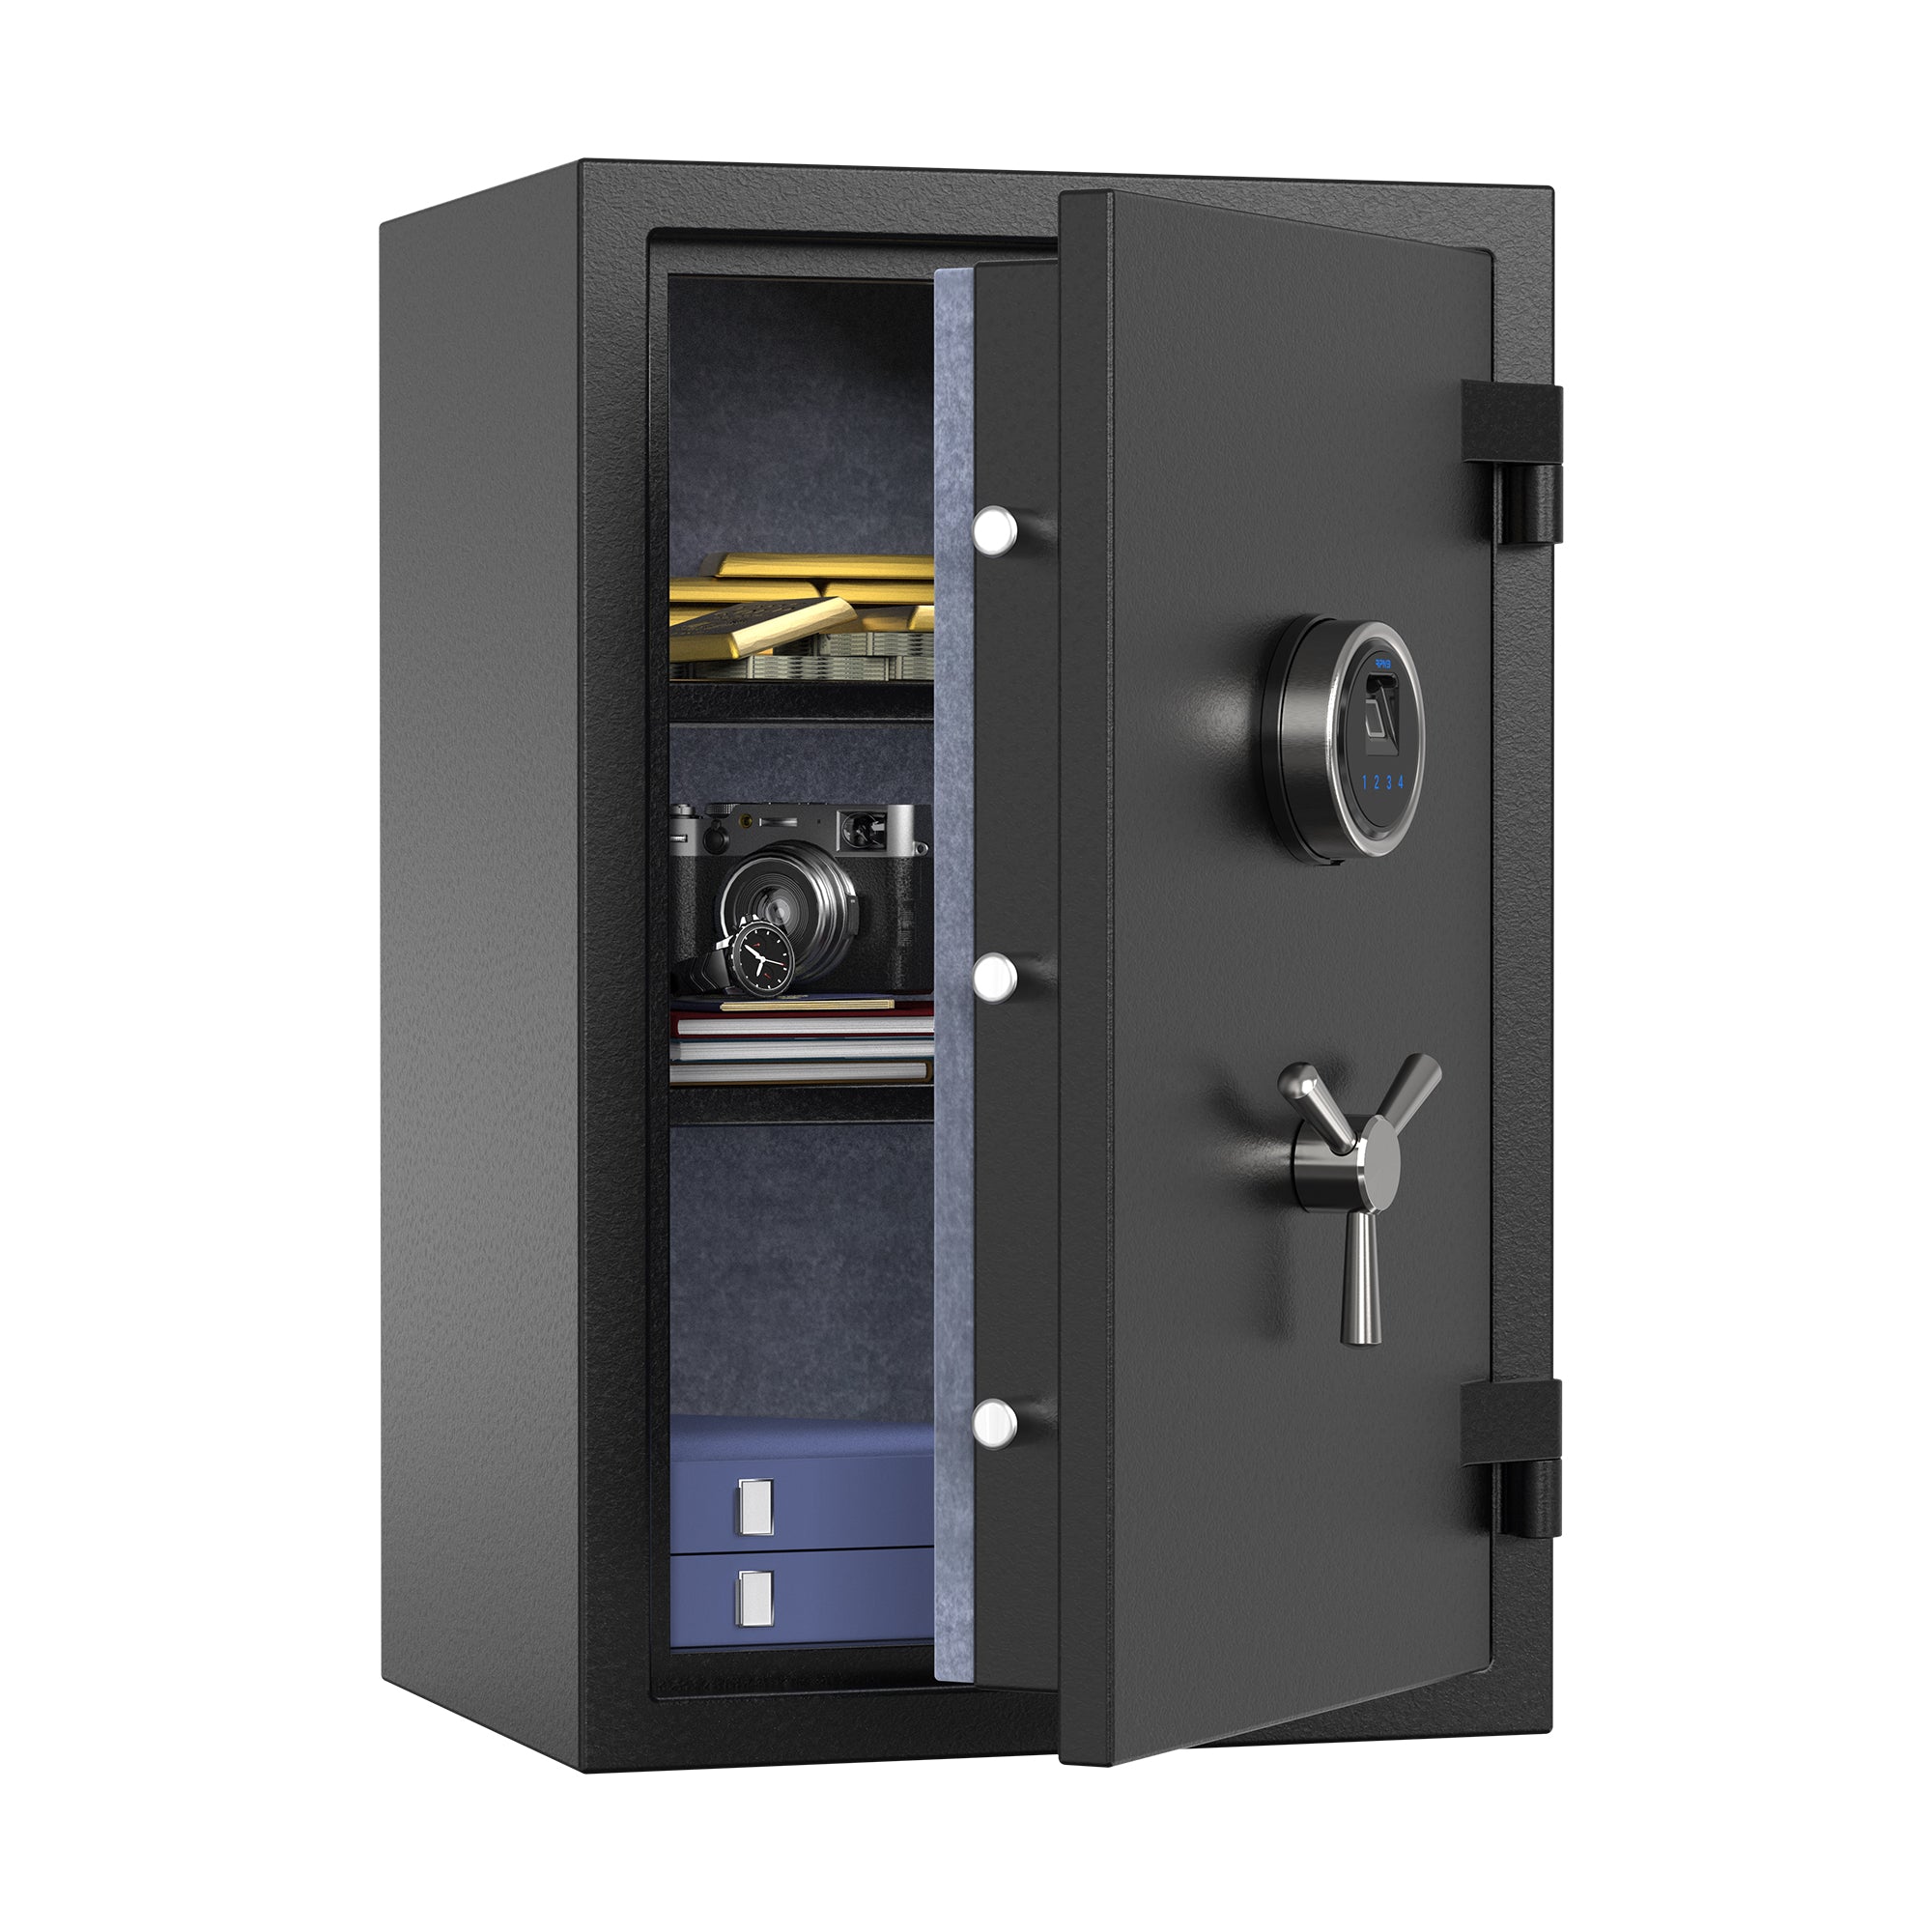 RPNB RPFS66 Large Biometric Fireproof Safe with Touch Screen Keypad